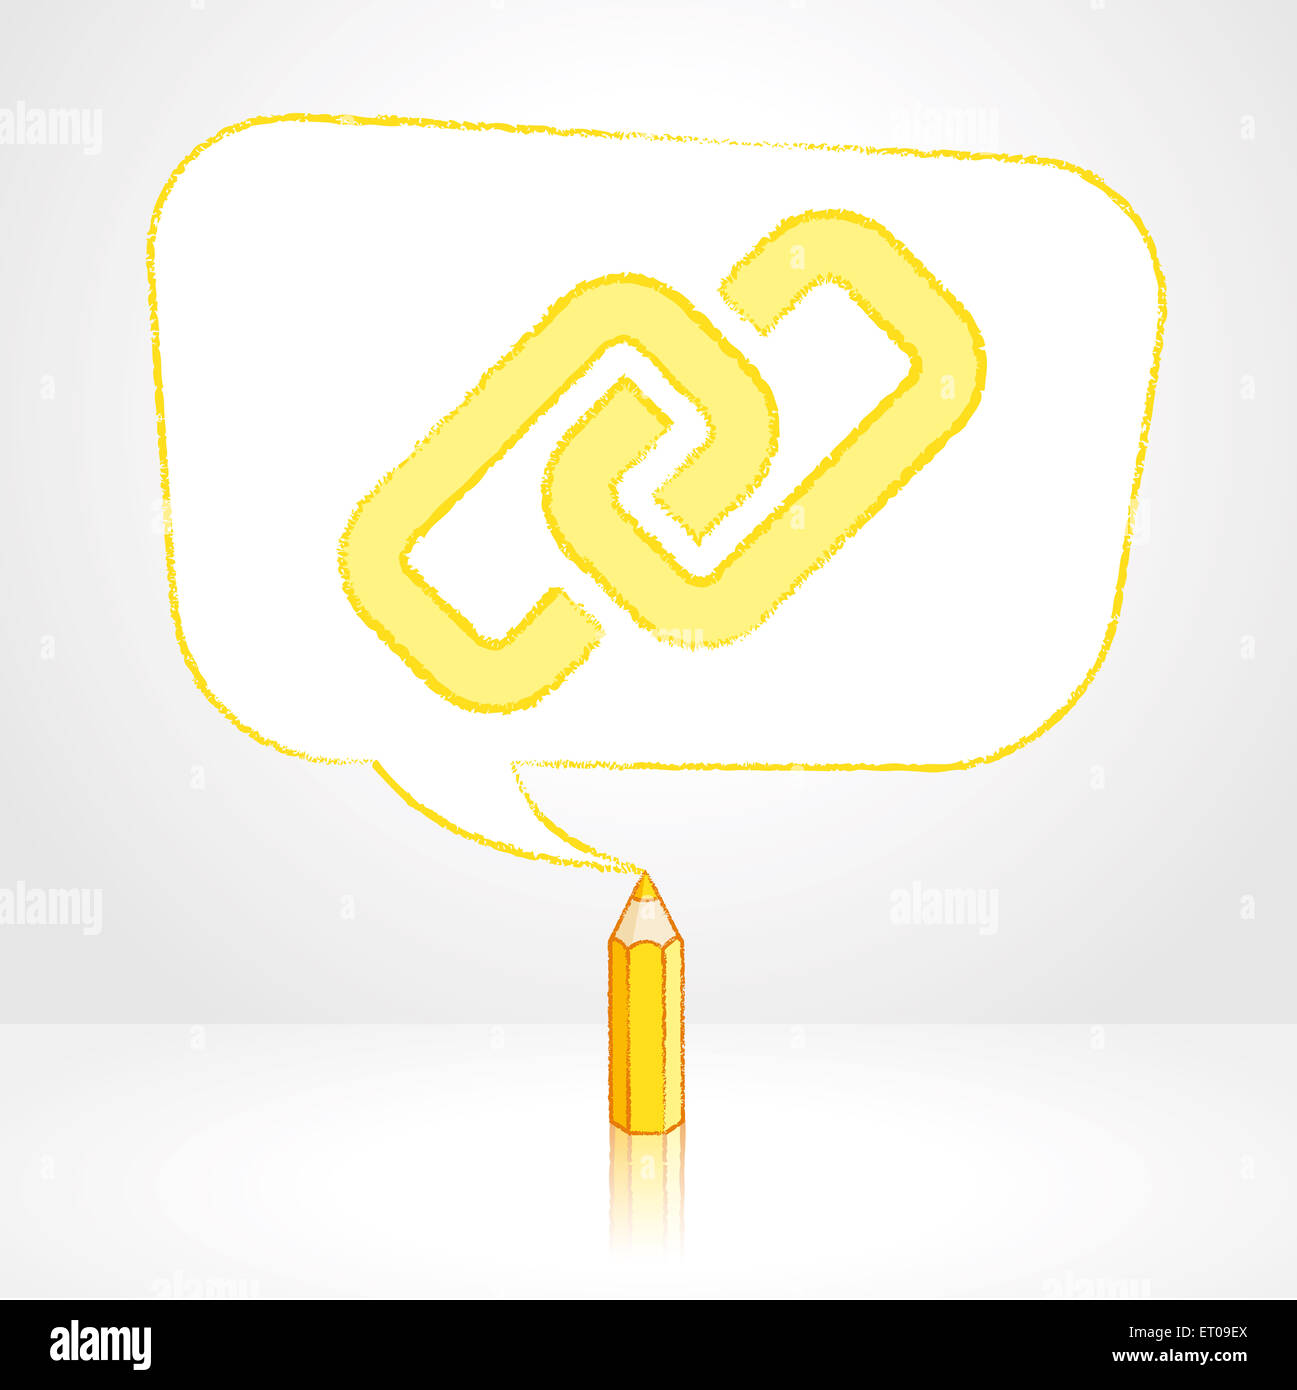 Yellow Pencil with Reflection Drawing Digital Media Link Icon in Rounded Skewed Rectangular Shaped Speech Bubble on Pale Backgro Stock Photo